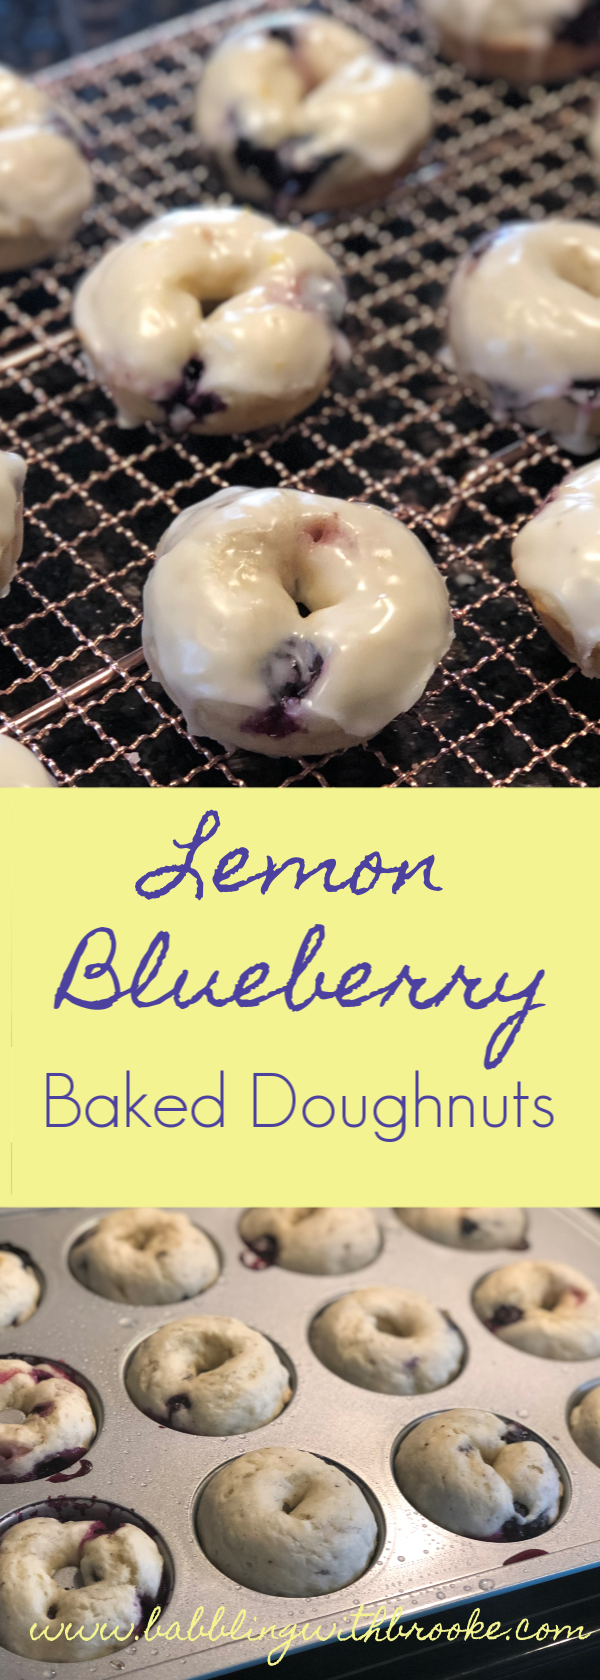 These delicious, easy baked doughnuts are the perfect brunch treat, sweet breakfast or pick me up on a bad day! They are perfect for anything and will be loved by everyone! #brunchrecipe #sweetbreakfast #breakfasttreat #bakeddoughnuts #doughnutrecipe #bakeddoughnutrecipe